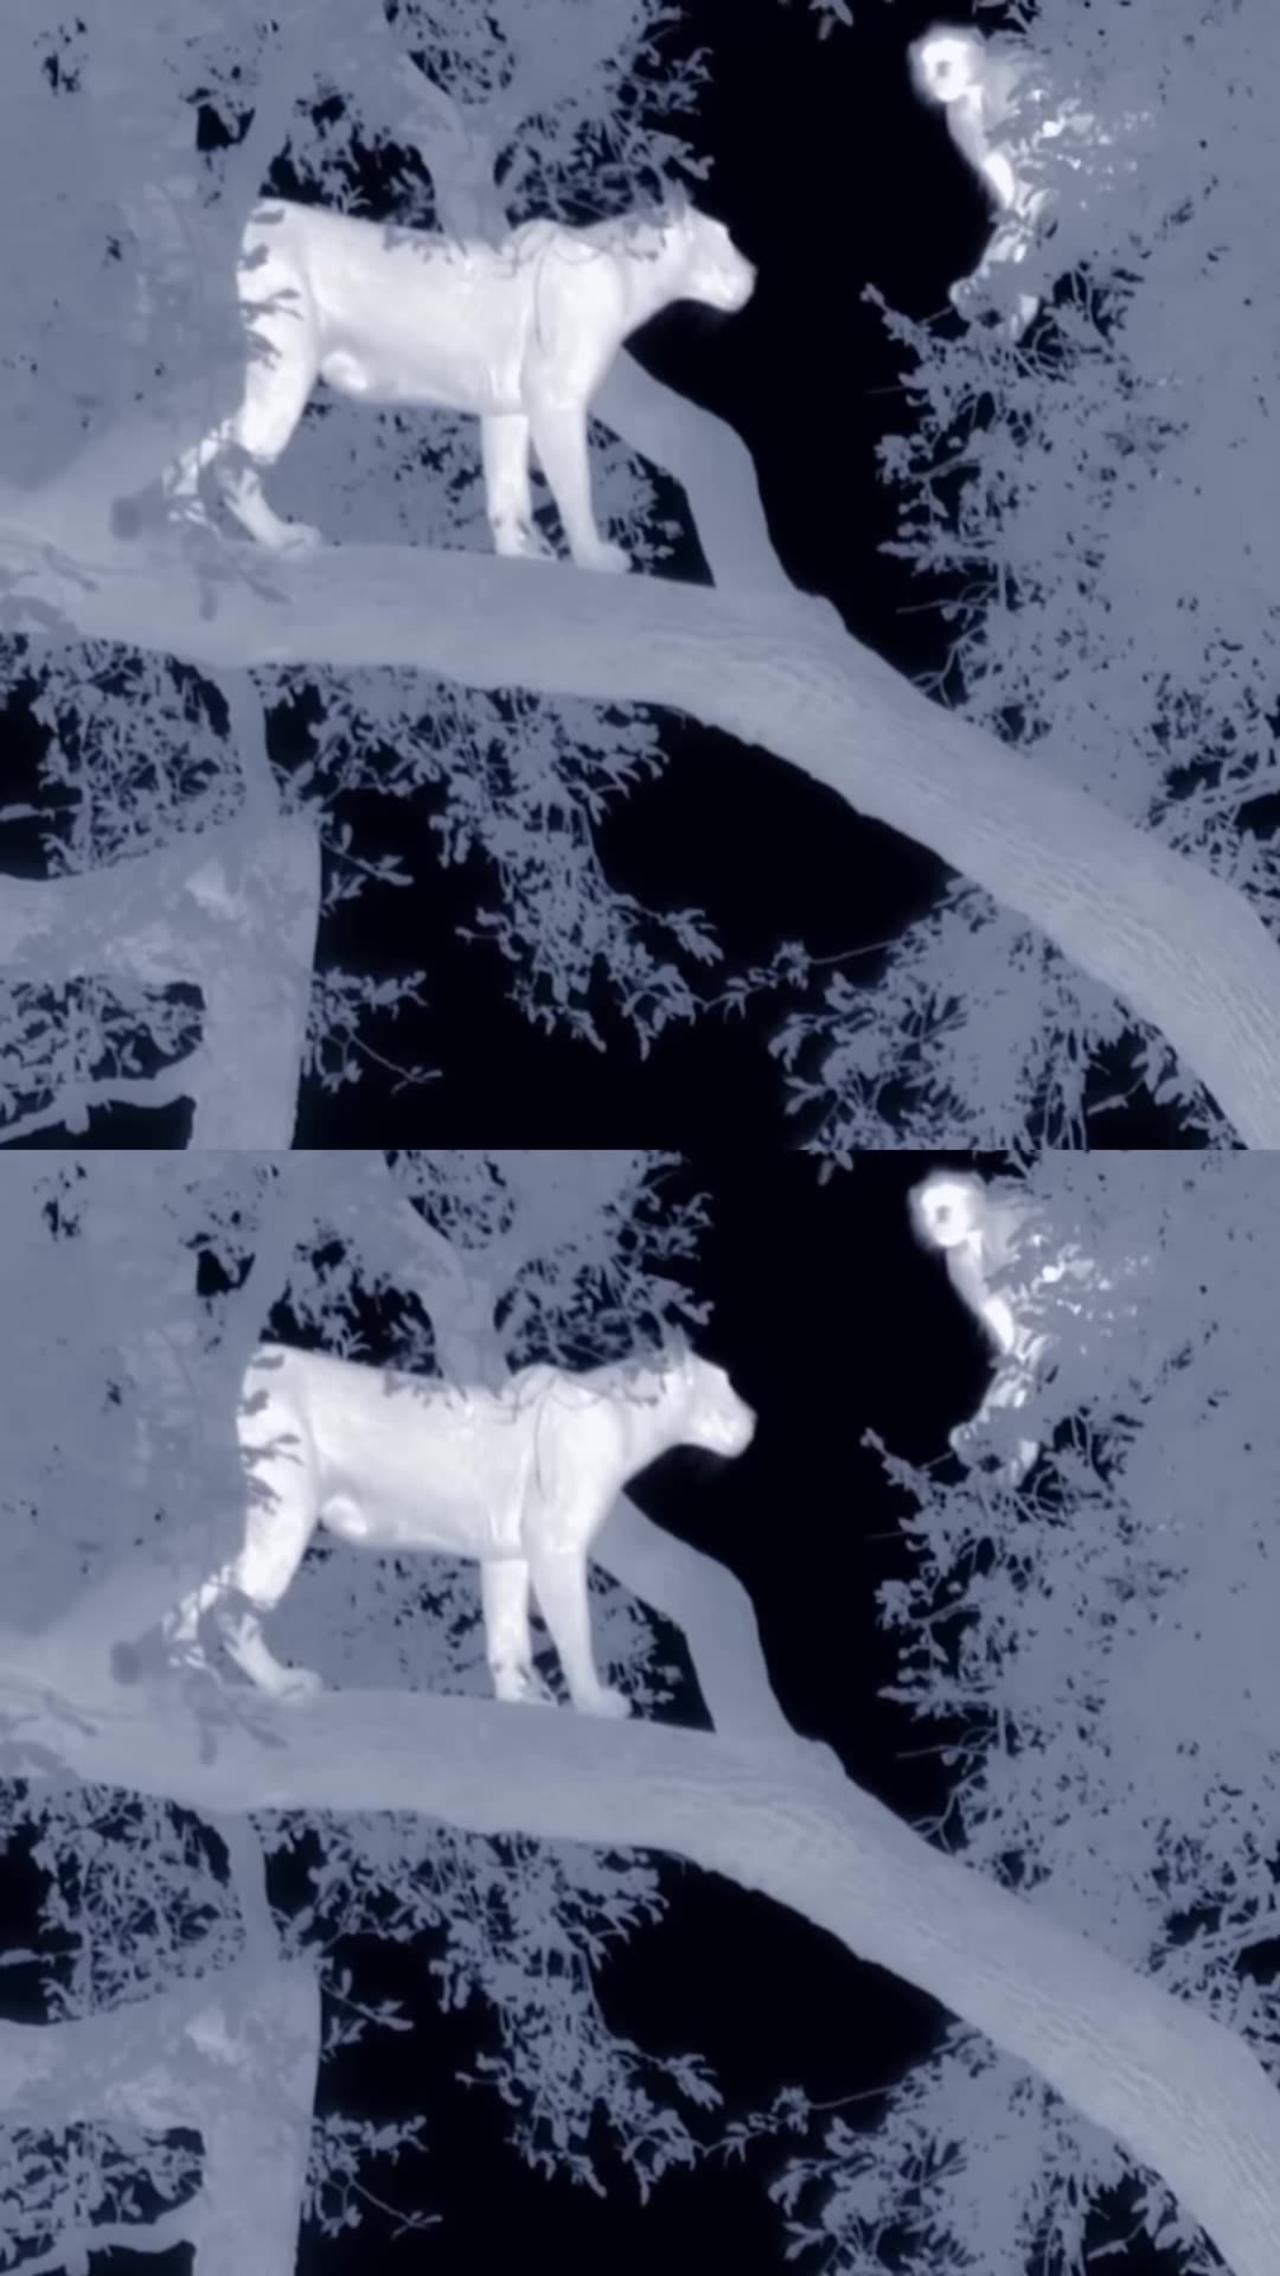 LEOPARD HUNTS BABOONS IN TREE (NIGHT VISION)